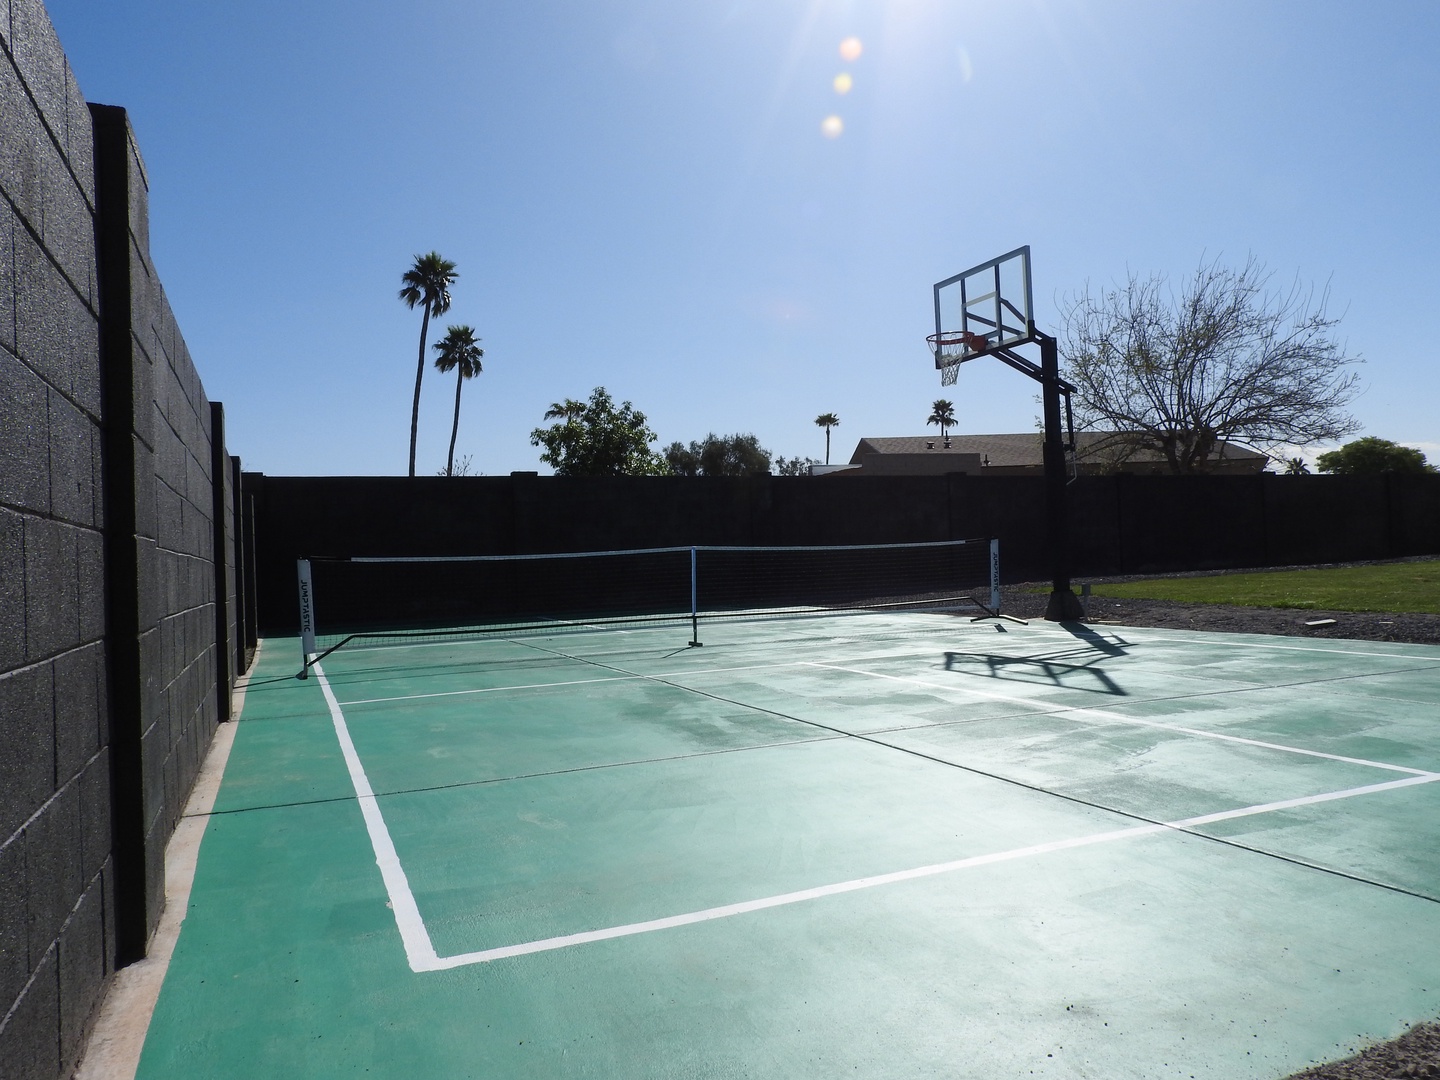 Pool, putting green, and basketball court